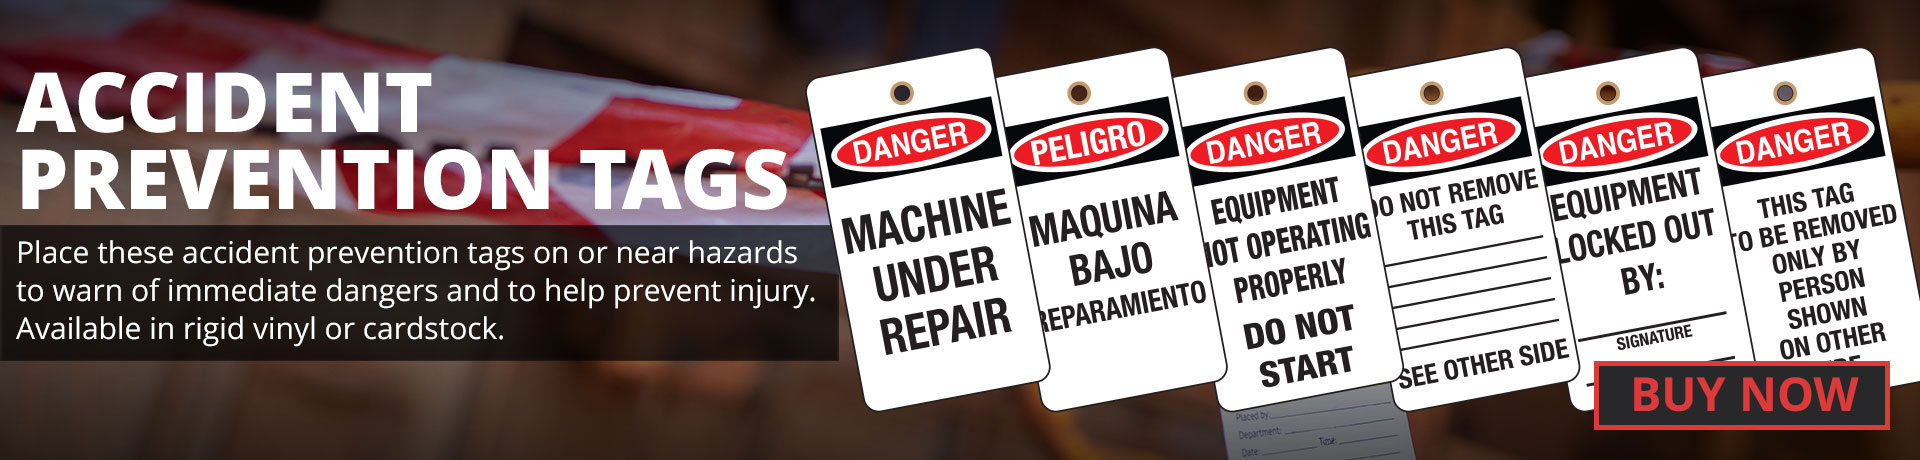 Accident Prevention Tags